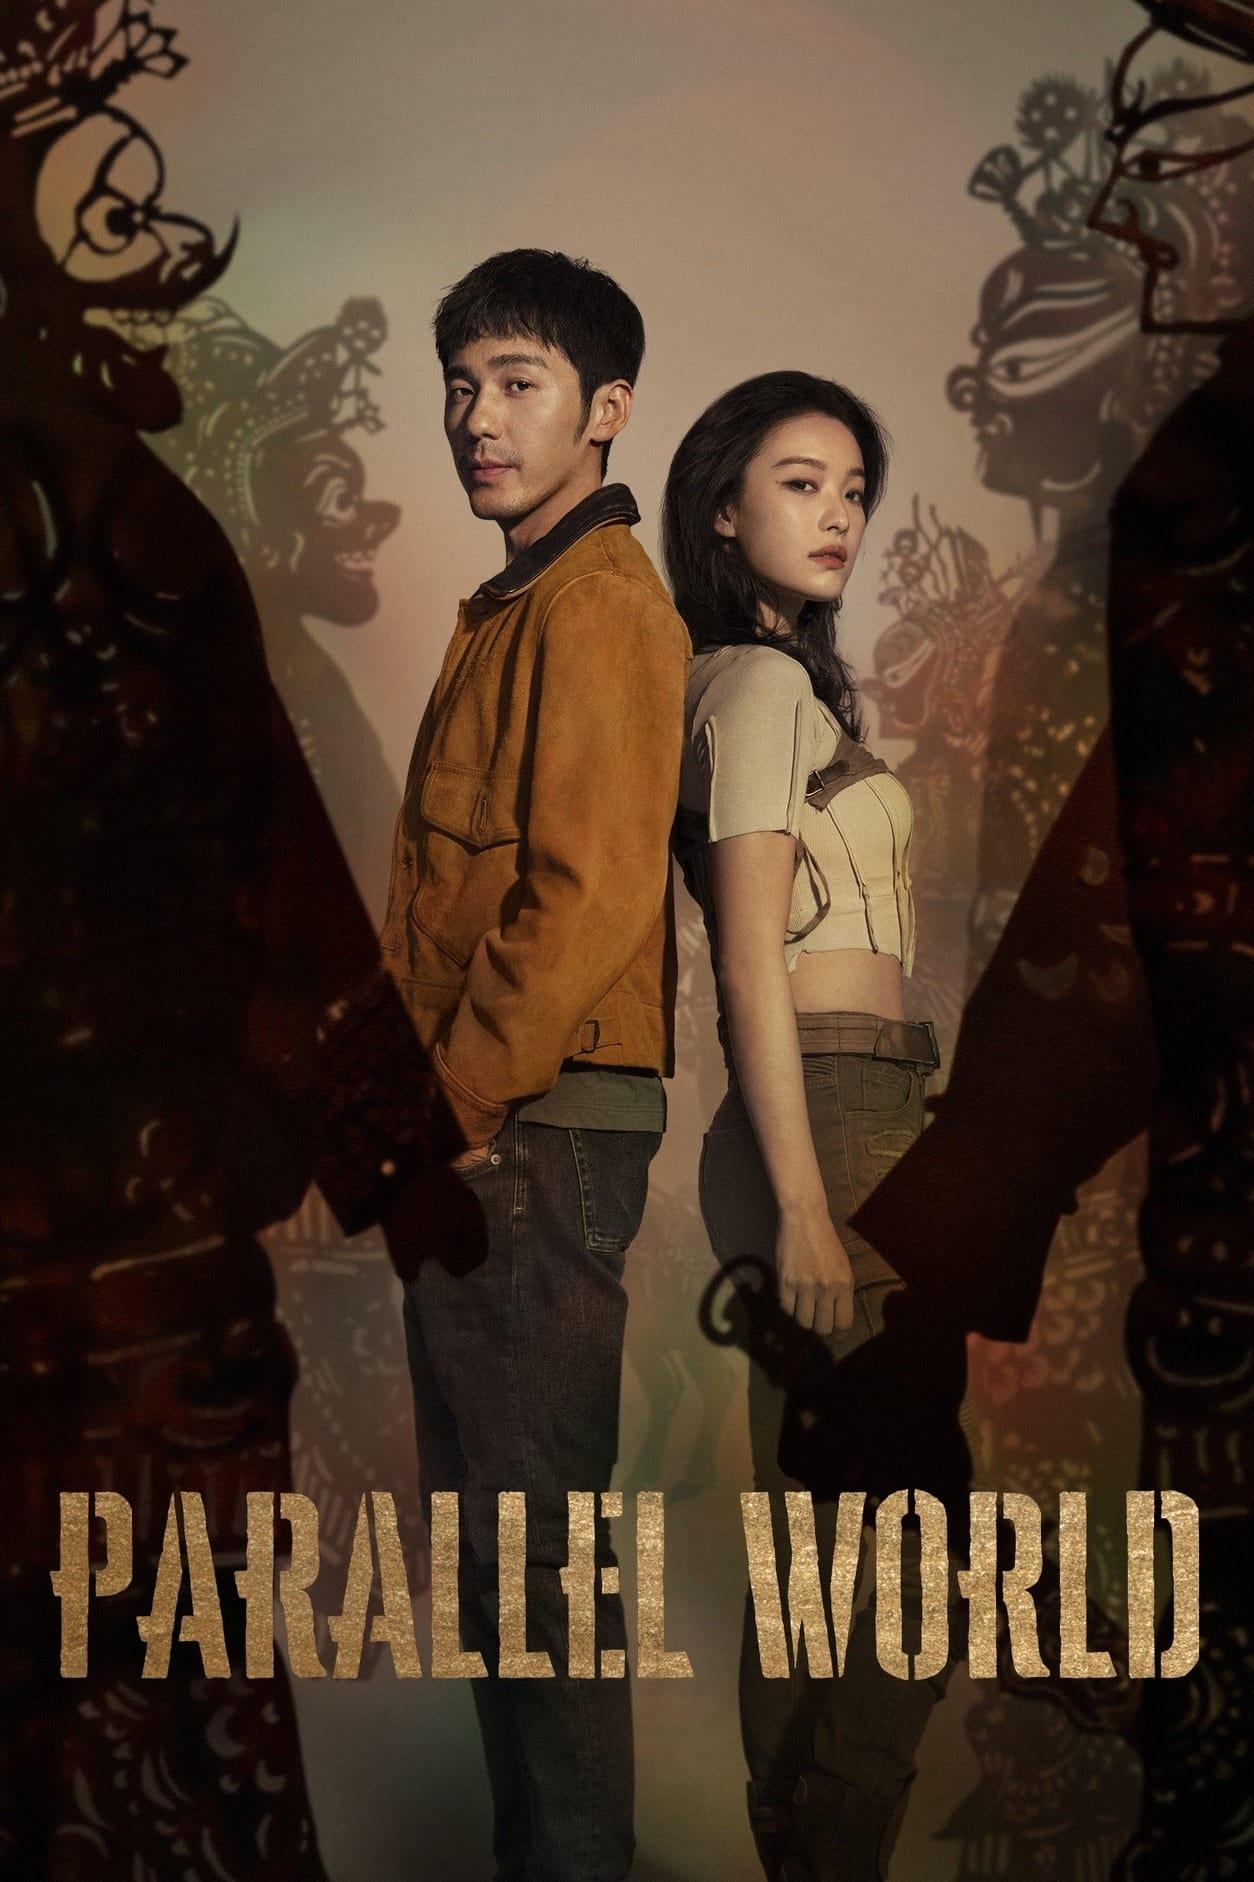 Parallel World poster